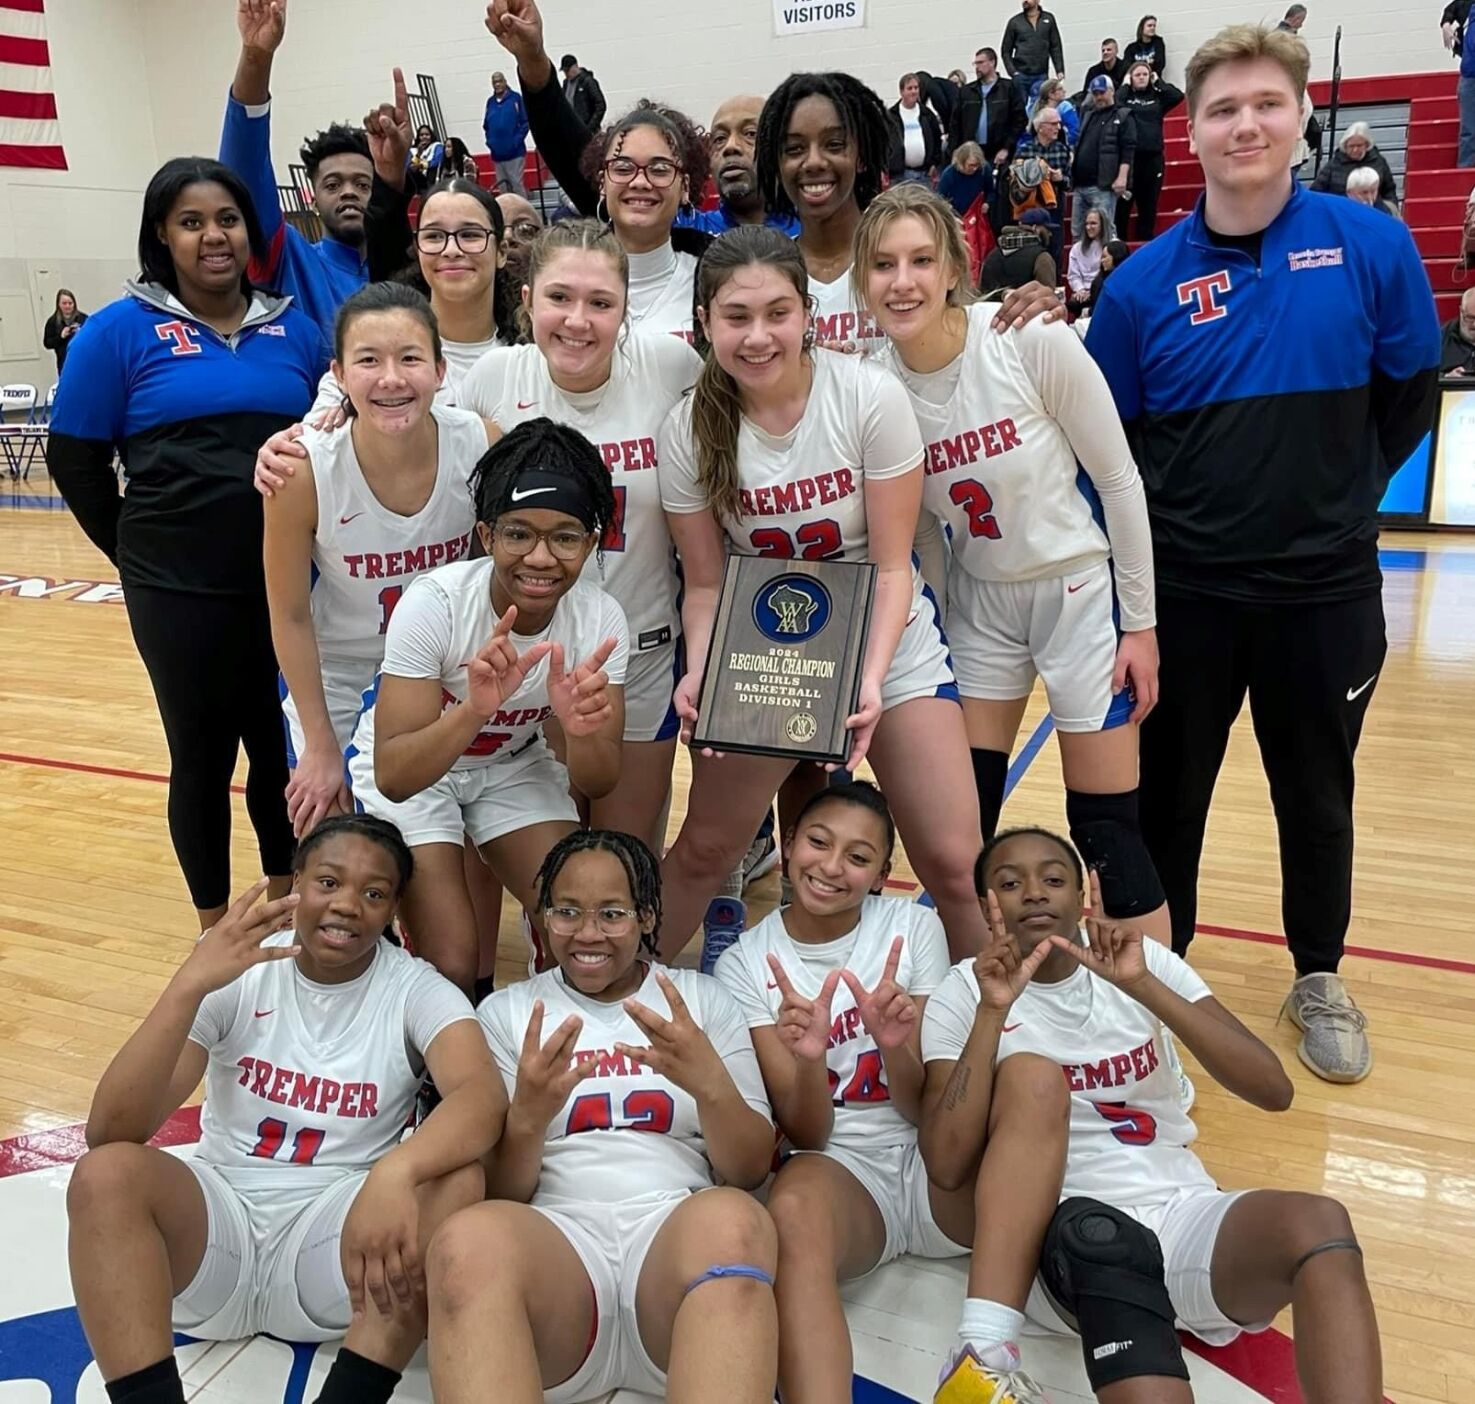 Tremper and Bradford Girls Basketball Teams Secure Regional Titles with Impressive Performances